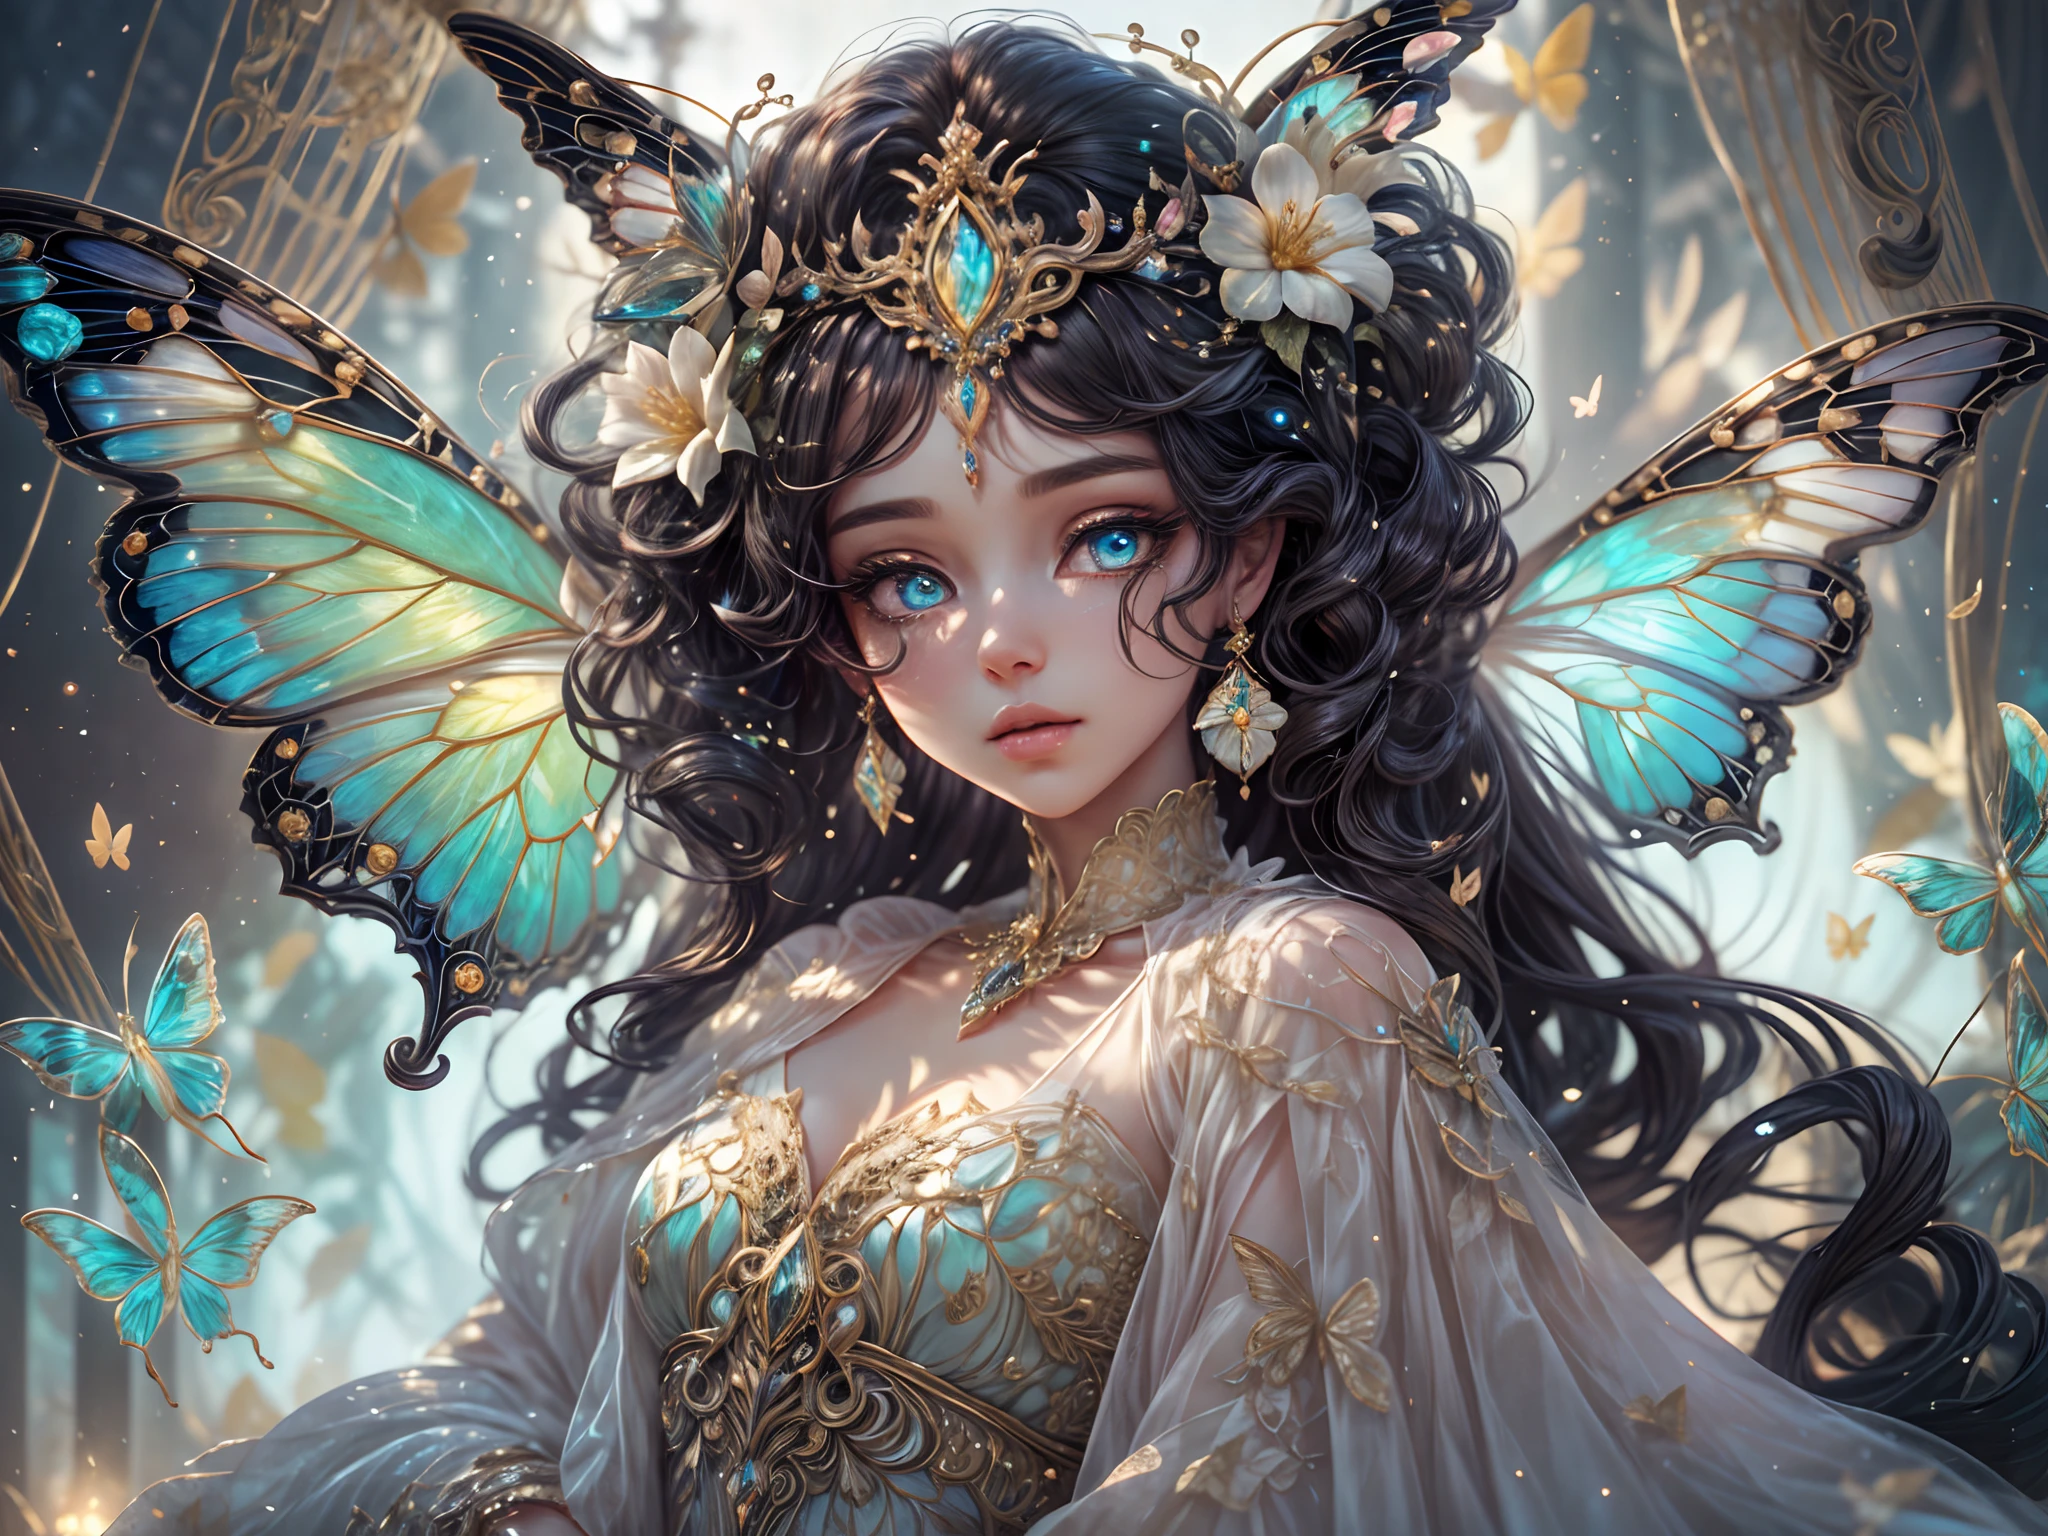 This is、It's a masterpiece of realistic fantasy with lots of sparkles, Glitter, and intricate ornate details. Produces one  woman with a beautiful delicate crown sitting on a garden swing at night. She is a beautiful and seductive butterfly queen with stunning curly black hair, (((Incredibly realistic and detailed dynamic eyes in bright colors with realistic shading))).  Her skin is translucent white, Her eyes are shining, And her dress is elegant. Her dress is spun with delicate and finest gossamer silk, Convoluted, Delicate floral details and gold silk butterfly sleeves. Her face is lovely and . Include flowers that glow in the dark, Lots of particles, Highly realistic fantasy butte fly with translucent gem-colored wings and fine details, And shine. Artwork done in the style of Guviz、Trending fantasy titles from Artstation and Midjourney、Reminds of the masters of this genre. camera: Using dynamic composition techniques、Emphasizes ethereal delicacy and delicate details.